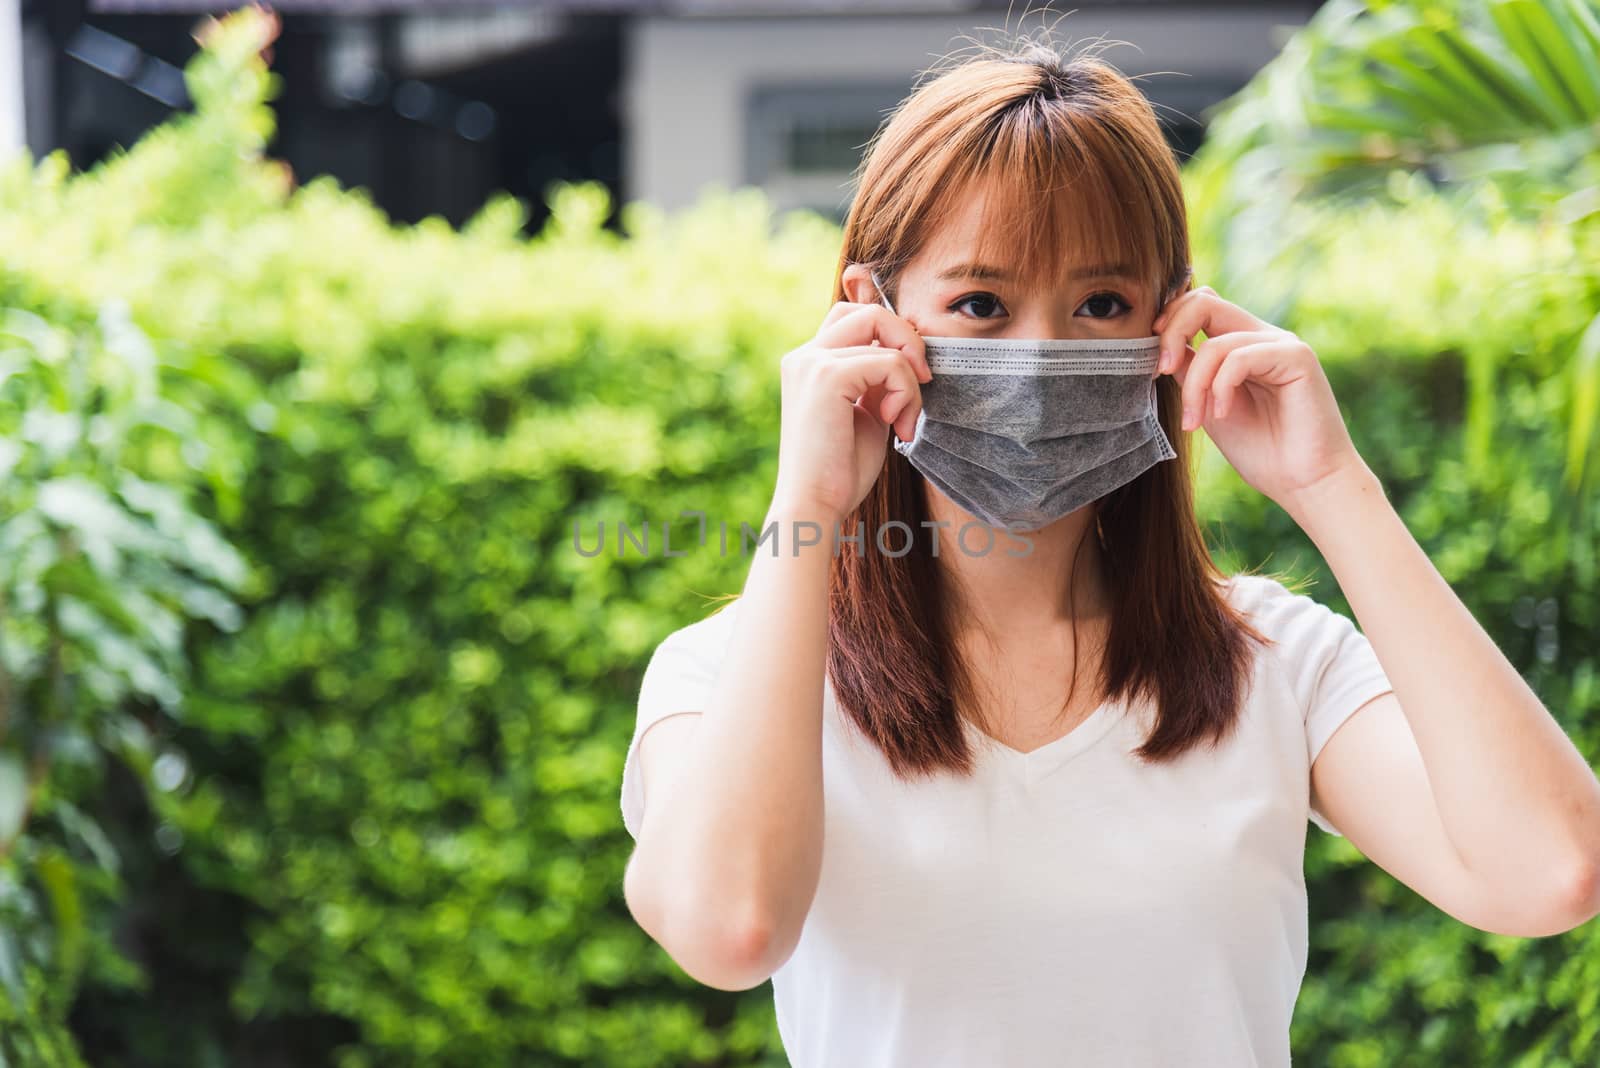 woman wearing face mask protective outdoor by Sorapop